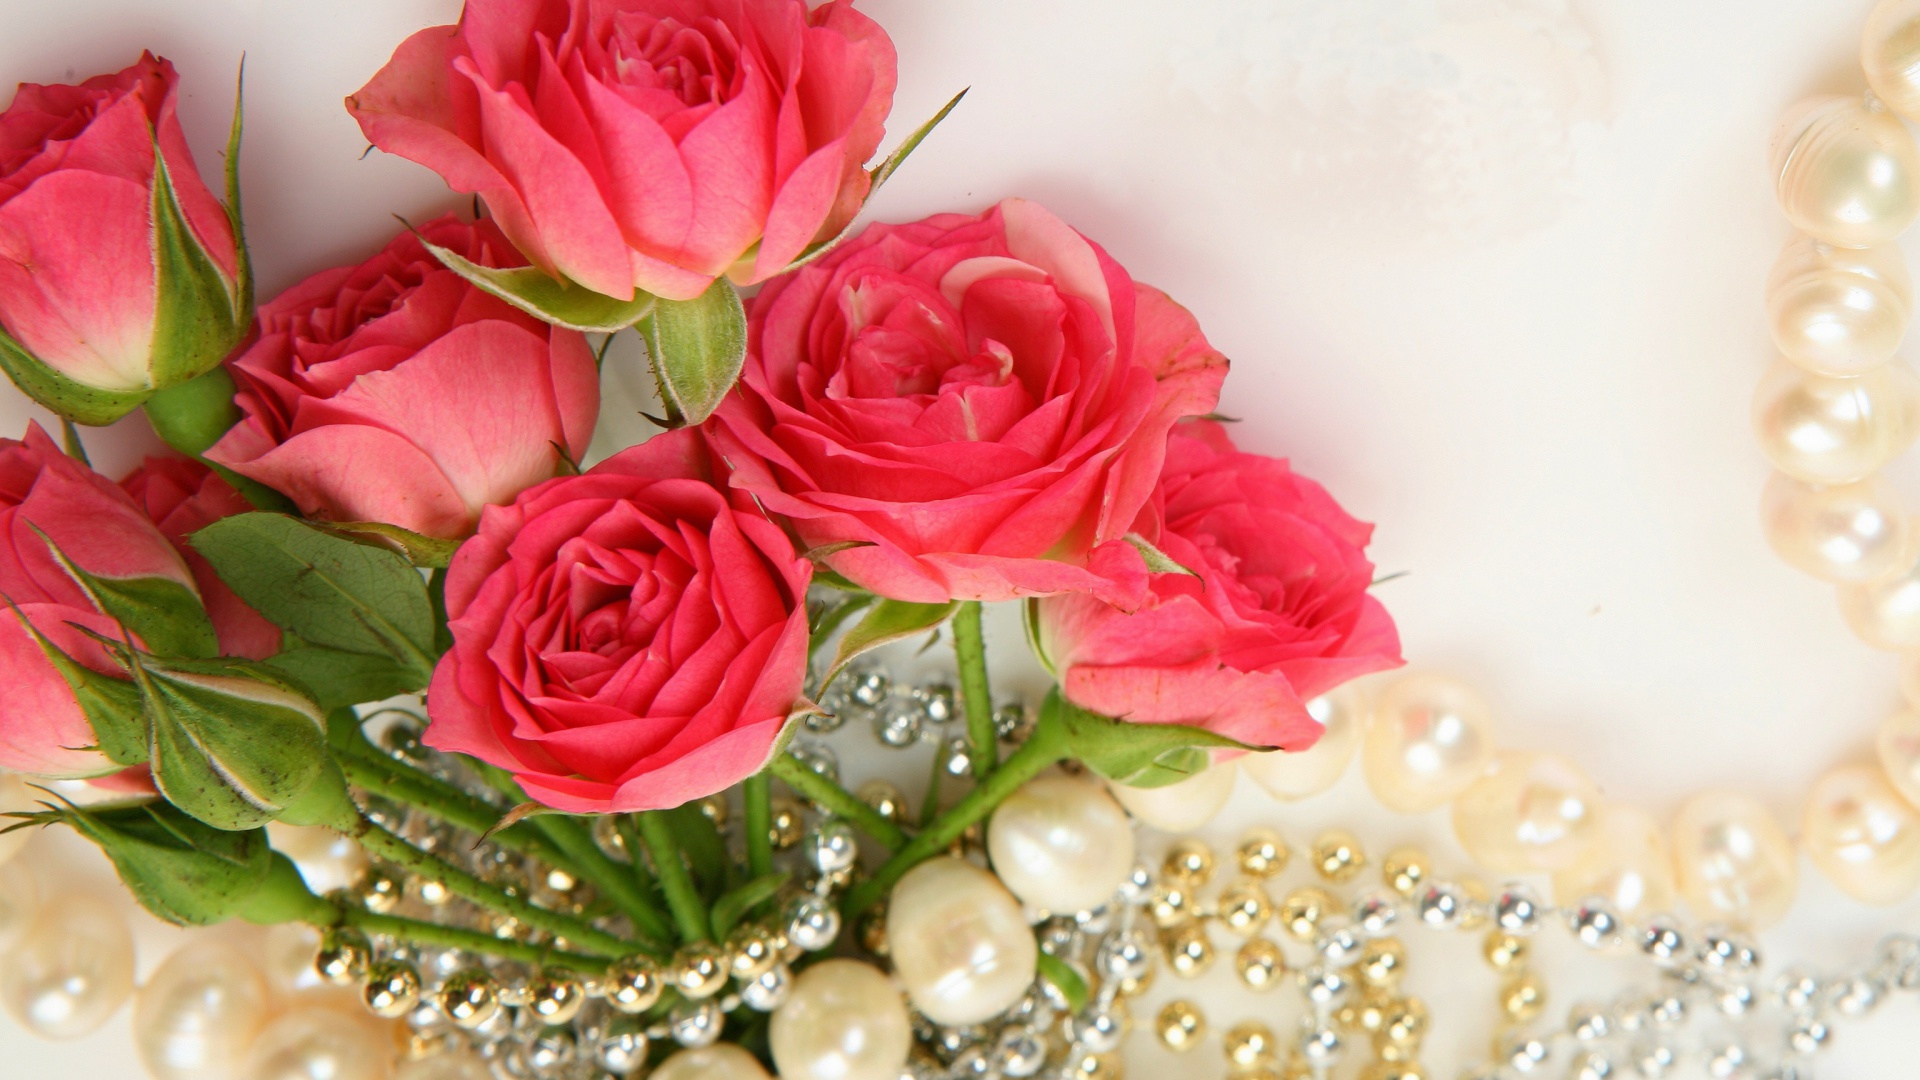 Das Necklace and Roses Bouquet Wallpaper 1920x1080